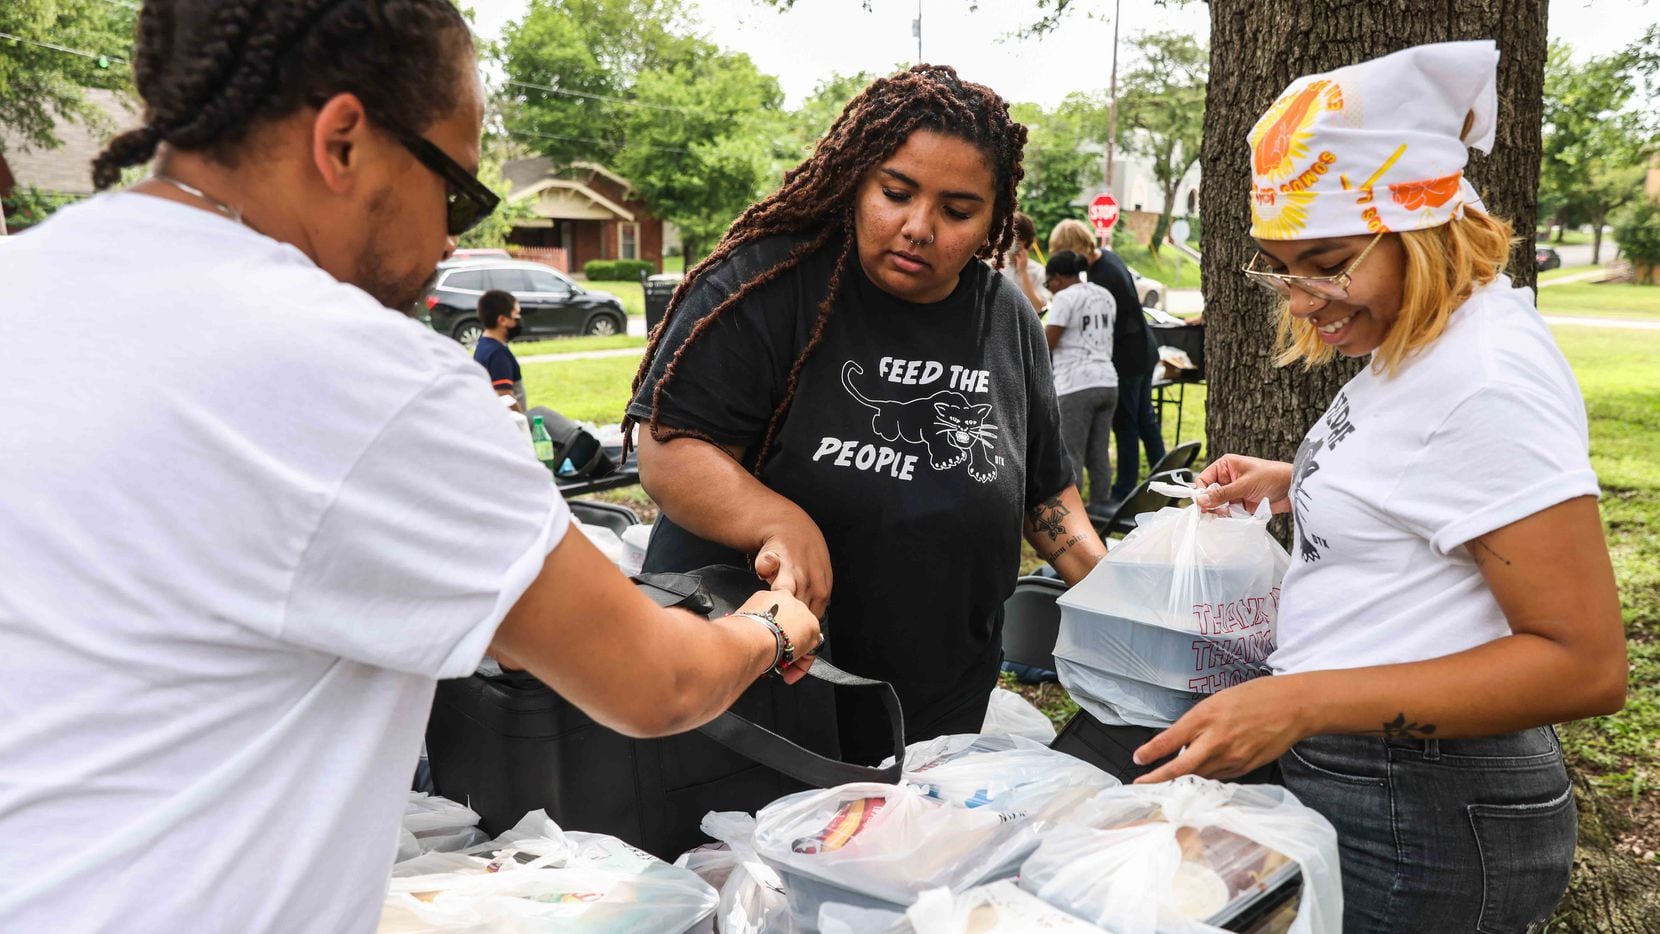 From left, Patrick Averhart, Vanessa Wilmore, Feed the People founder, and Bethany Silva, pack boxes with food to deliver in Dallas on Thursday, June 3, 2021. Feed the People is an initiative that organizes free grocery delivery and resource distribution to those in need based in the metroplex and centered around “solidarity not charity.”